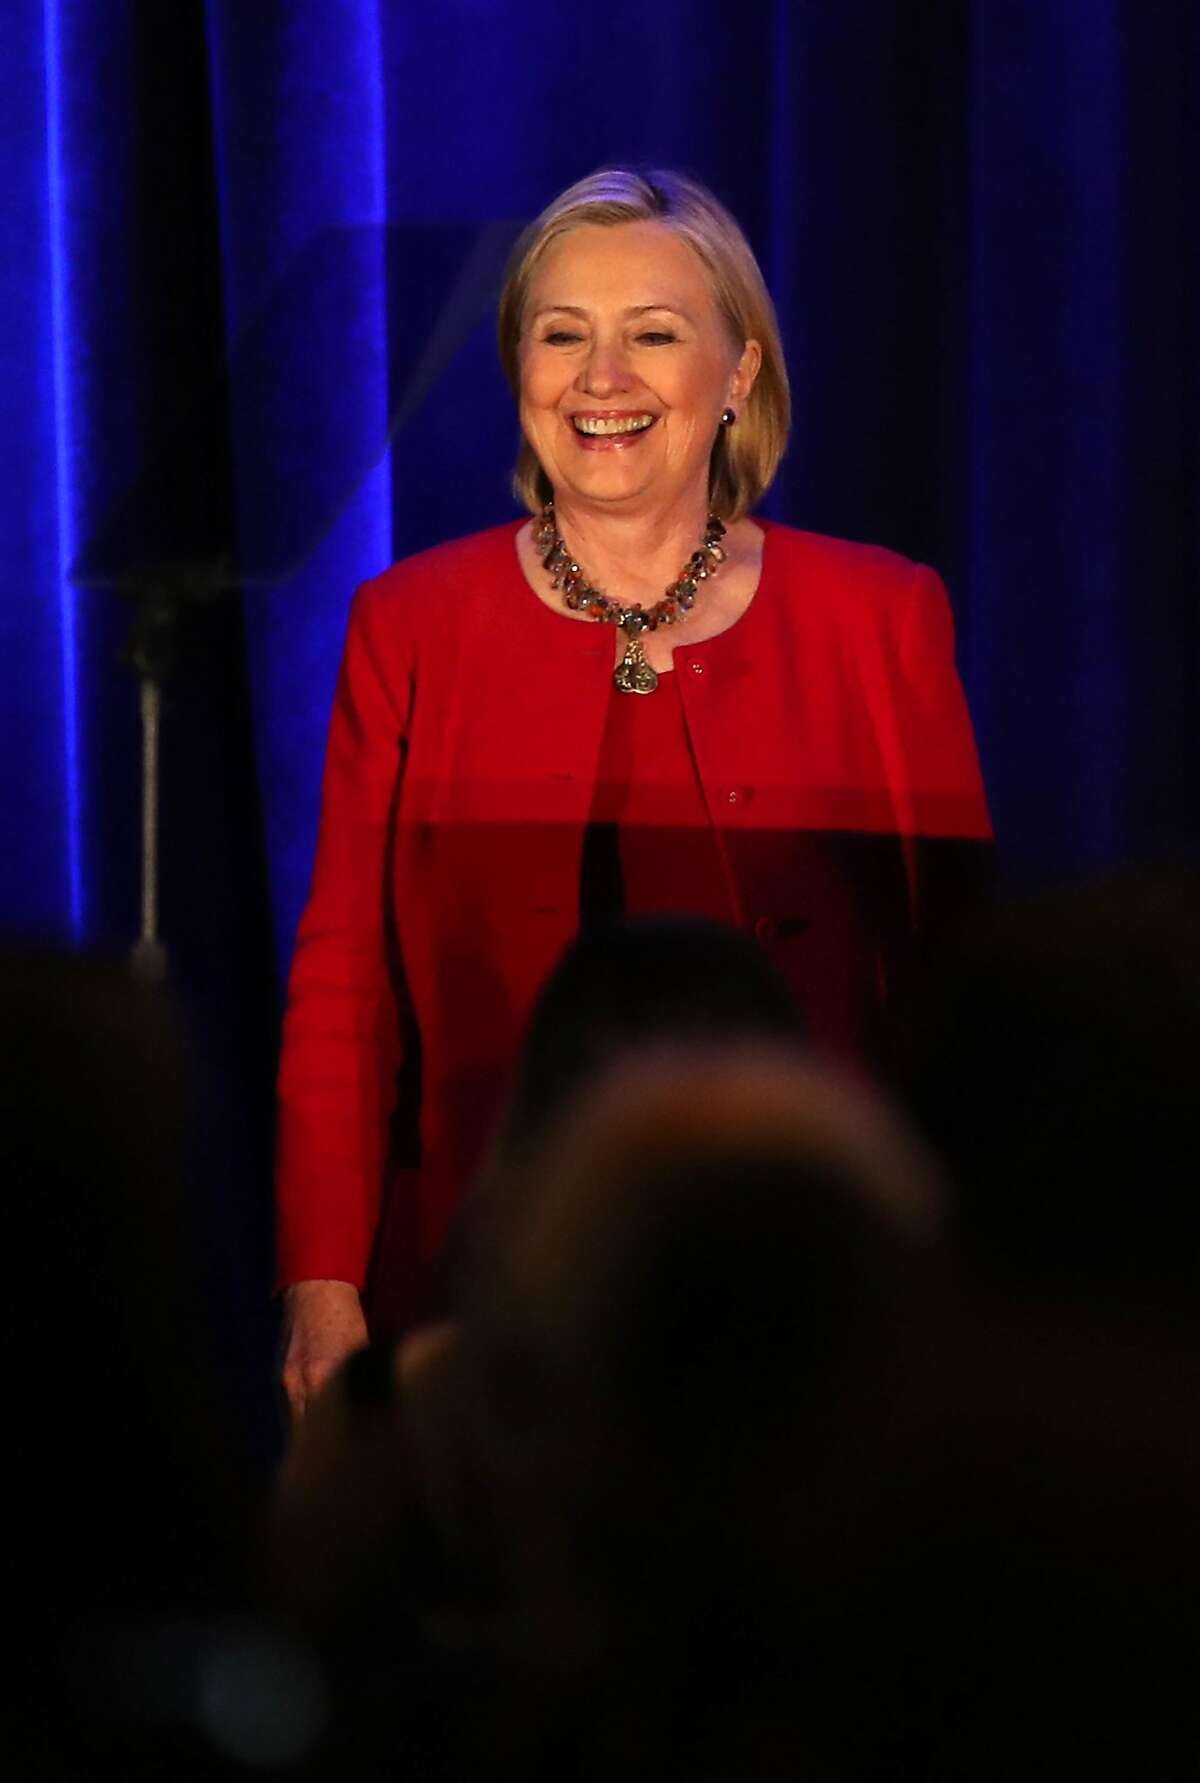 After receiving 2018 Courageous Leadership Award, Hillary Clinton speaks at Giffords Law Center's 25th Anniversary Dinner at Hyatt Regency in San Francisco, Calif., on Thursday, June 14, 2018.